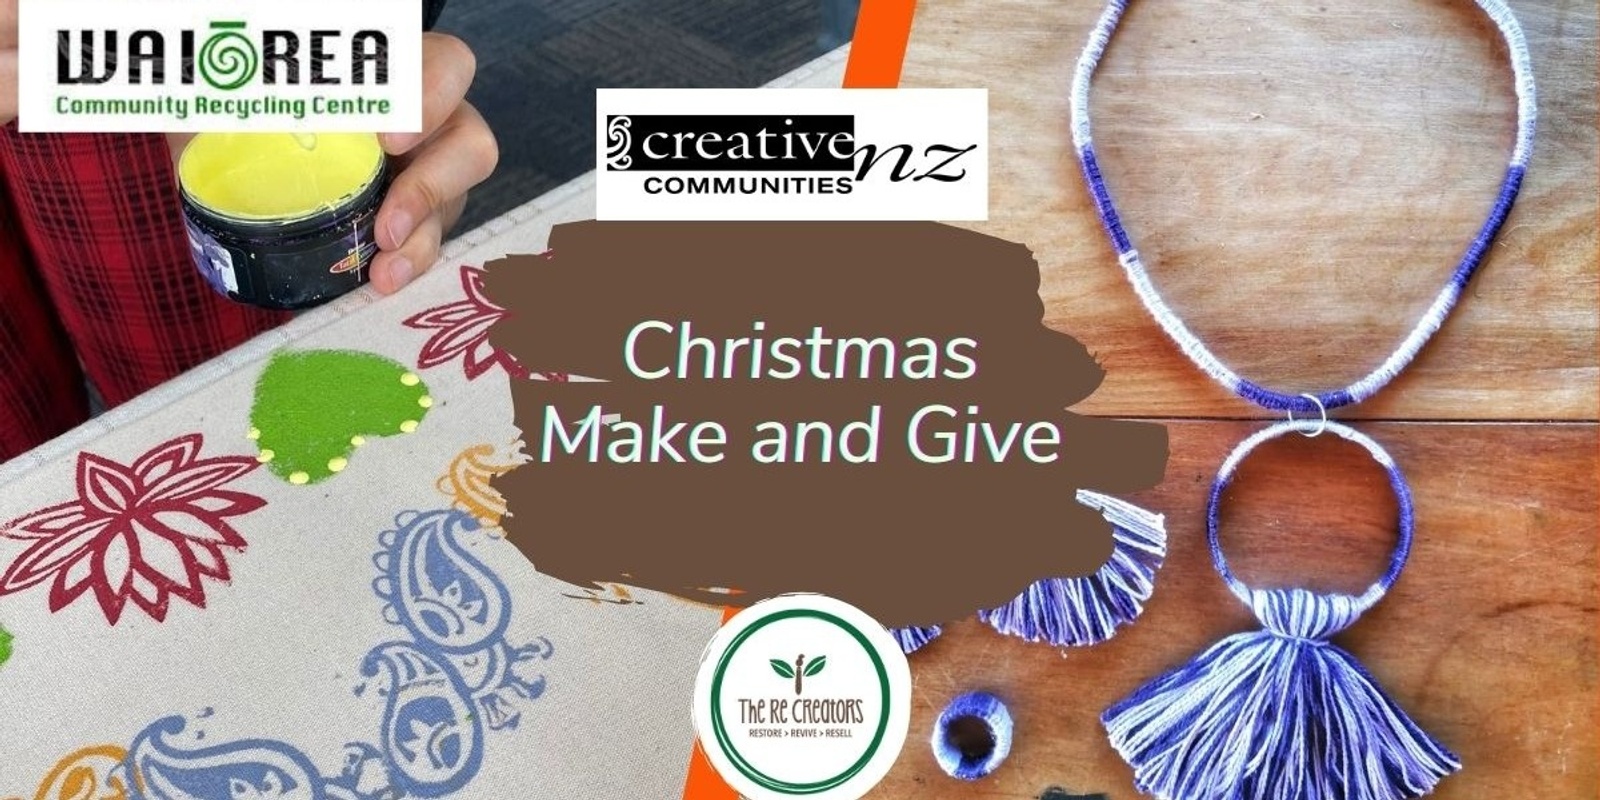 Banner image for Make and Give: Wall Hanging Printing / Upcycled Jewellery, Waiōrea Community Recycling Centre, Thurs 21 Dec 10am-12pm